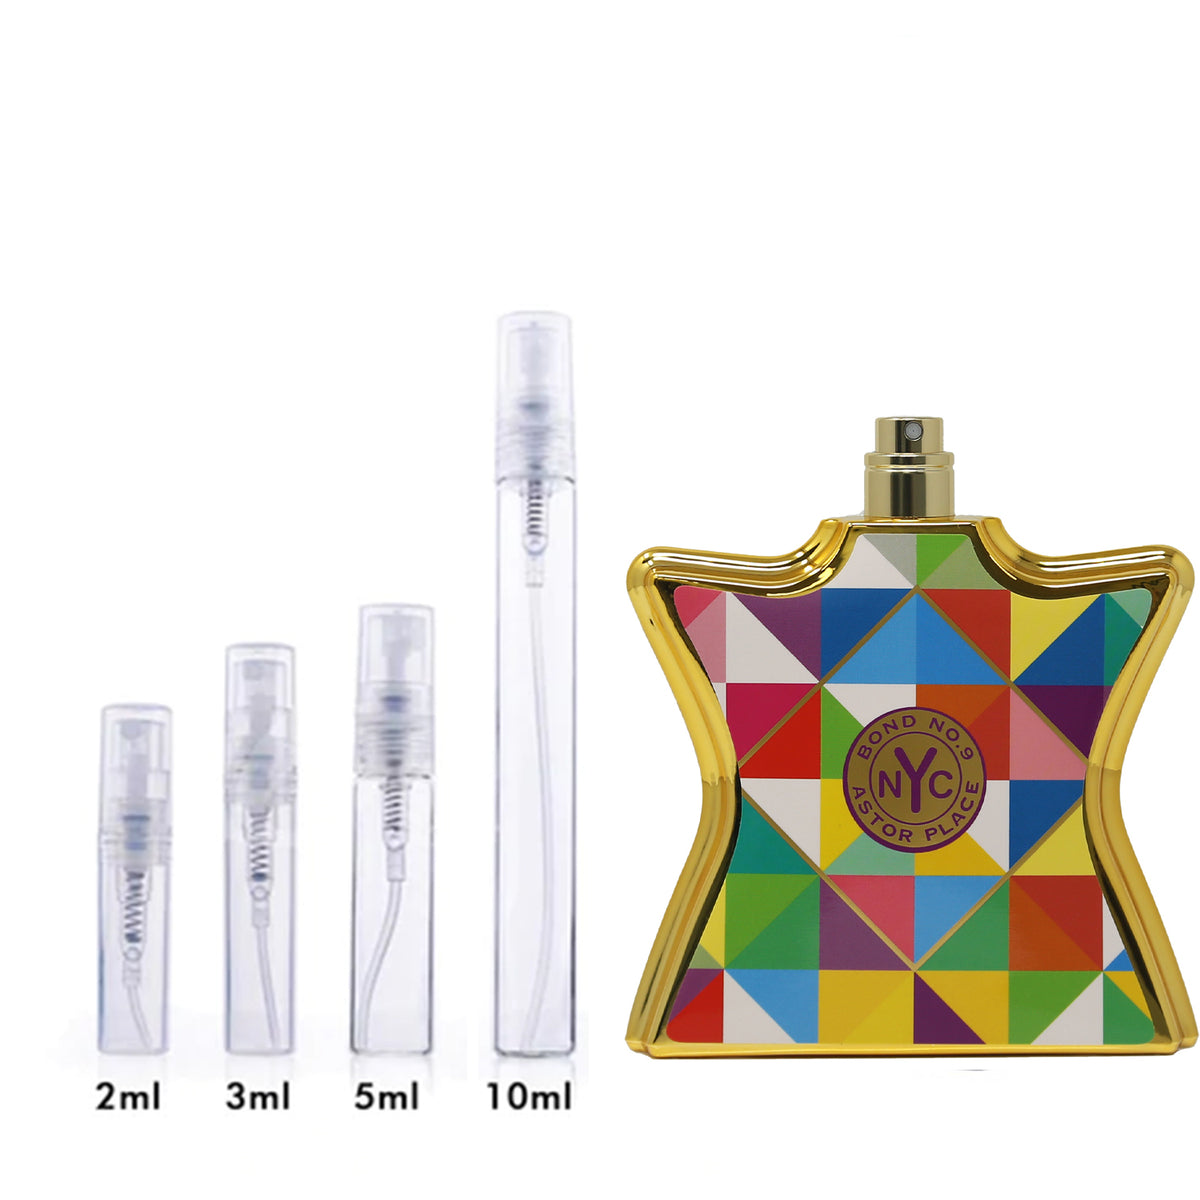 Astor Place by Bond No. 9 Fragrance Samples | DecantX | Scent 